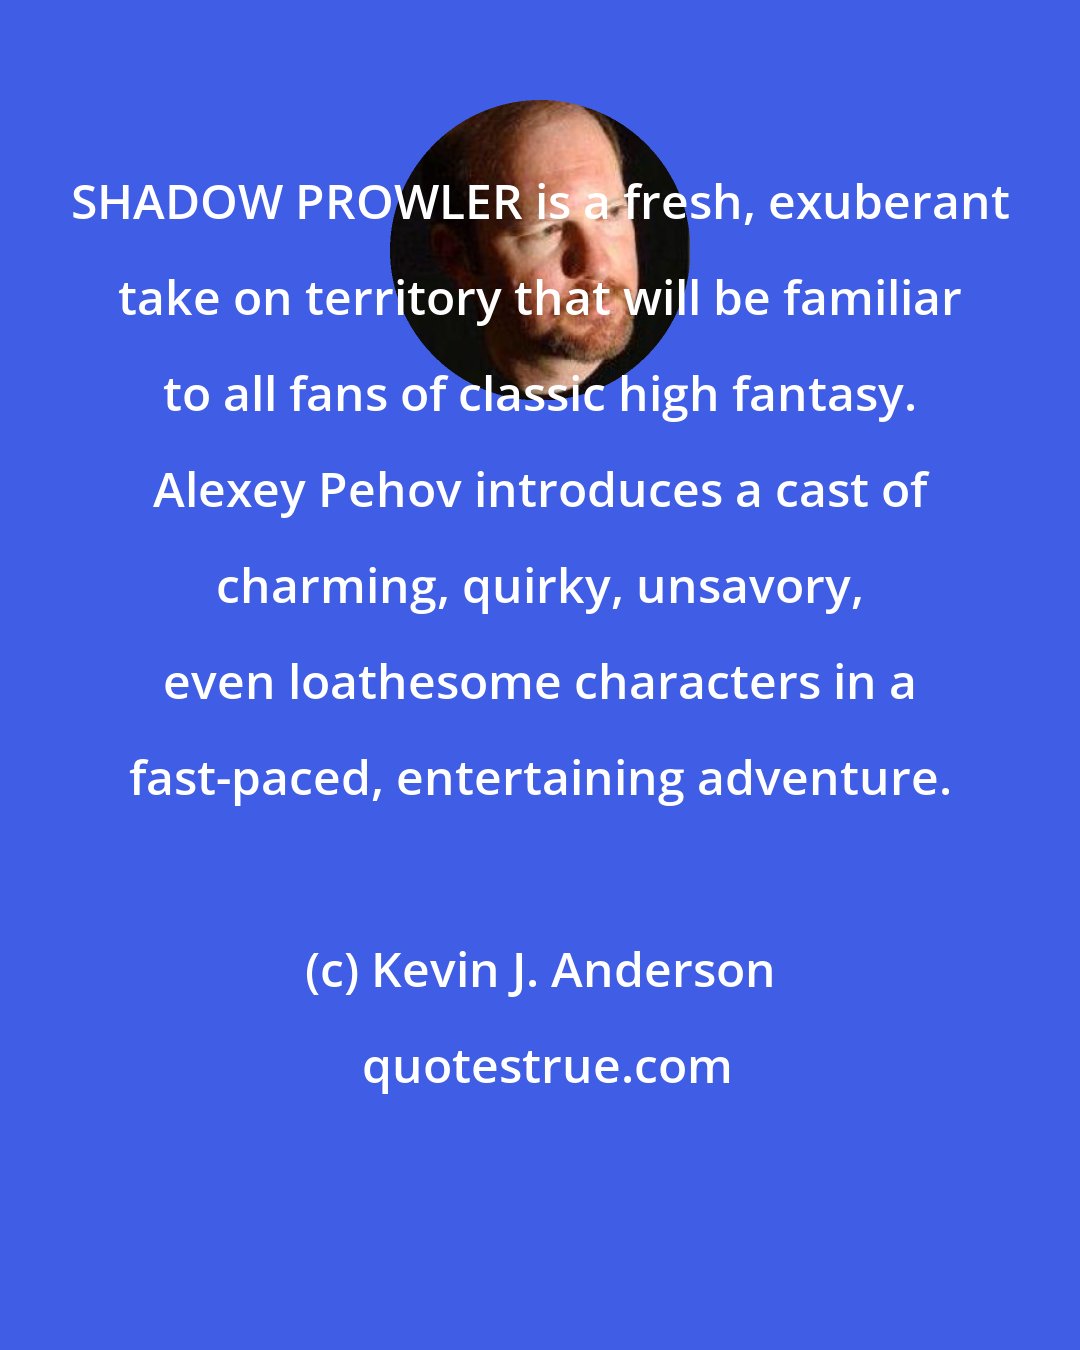 Kevin J. Anderson: SHADOW PROWLER is a fresh, exuberant take on territory that will be familiar to all fans of classic high fantasy. Alexey Pehov introduces a cast of charming, quirky, unsavory, even loathesome characters in a fast-paced, entertaining adventure.